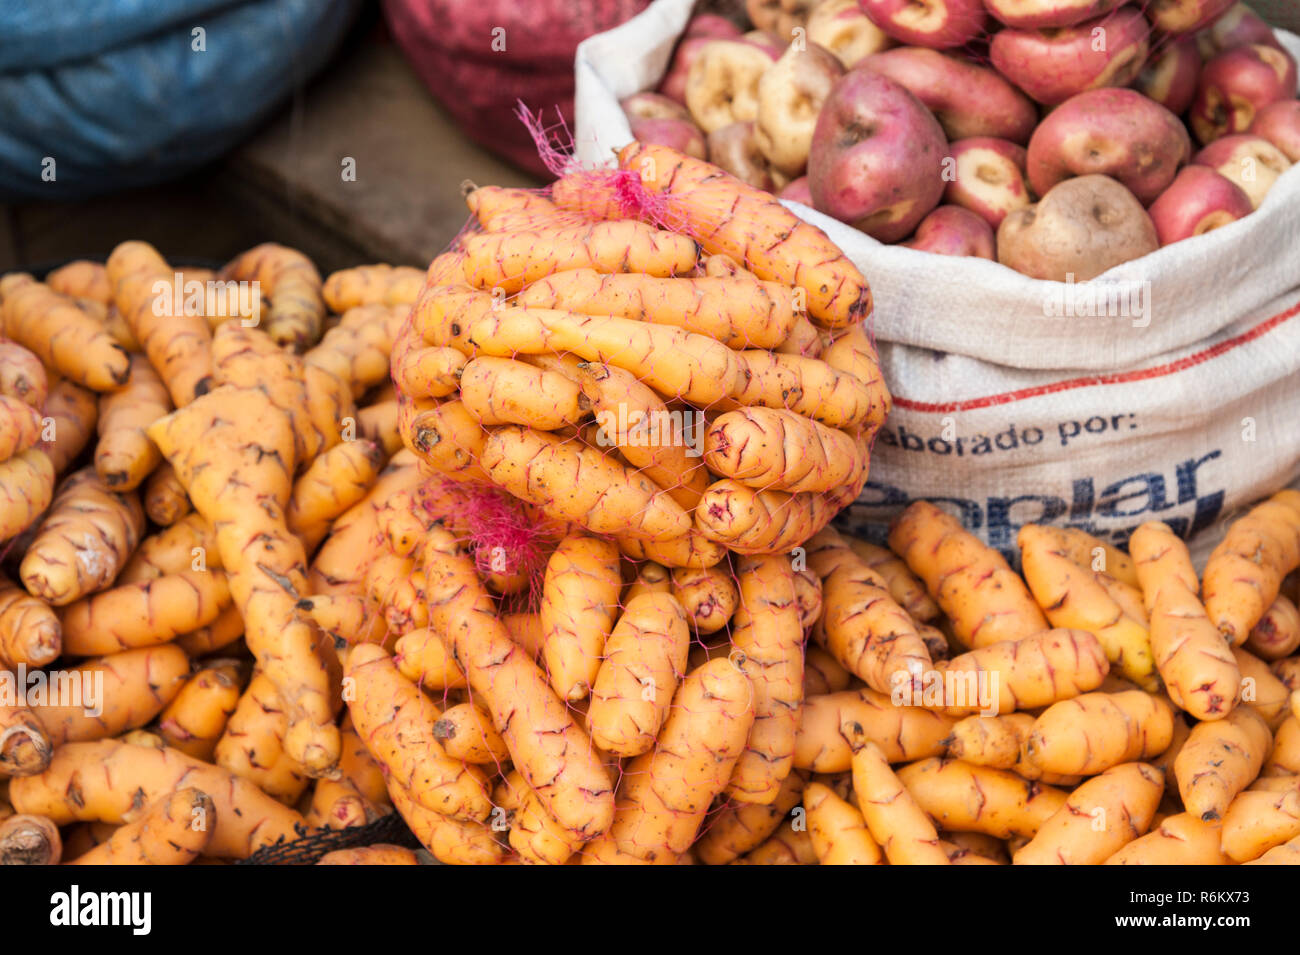 Different types of potatoes on display at Rodriguez market - La Paz, Bolivia Stock Photo